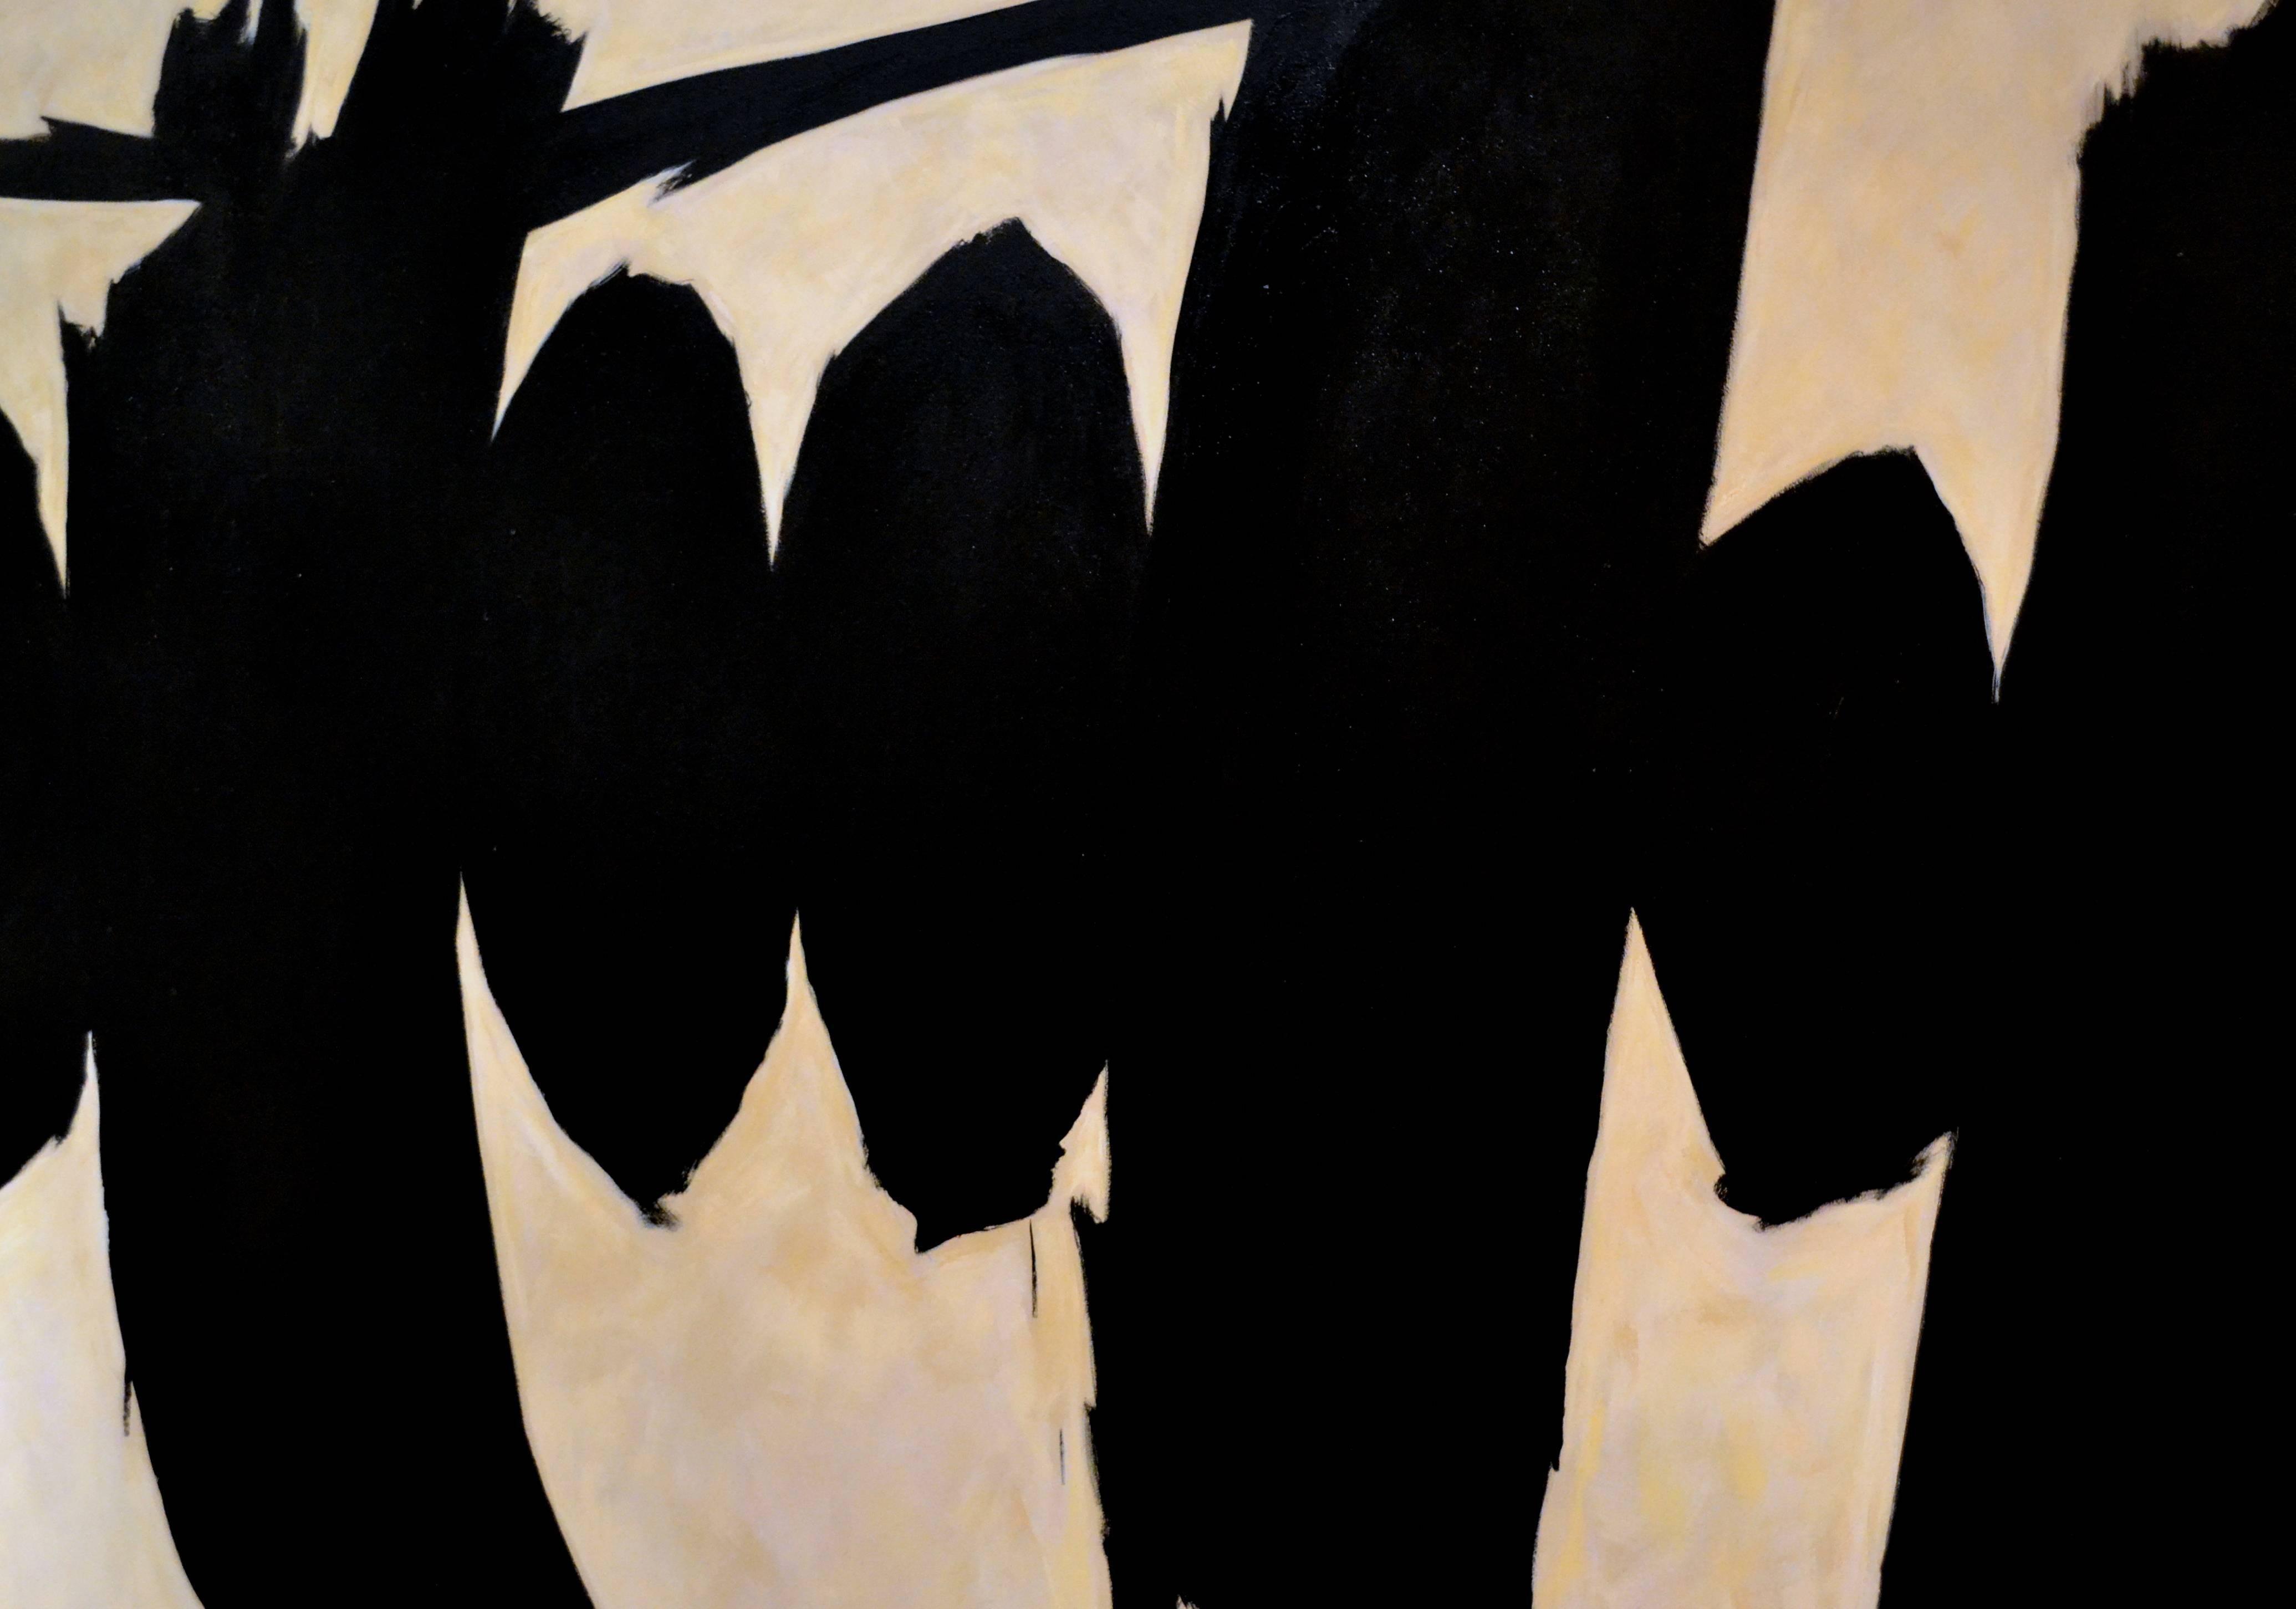 It isn't without reason that viewers believe they've come across an unusual and perhaps rarely seen painting by renowned artist Robert Motherwell. However, the artist behind this exceptional abstract titled 